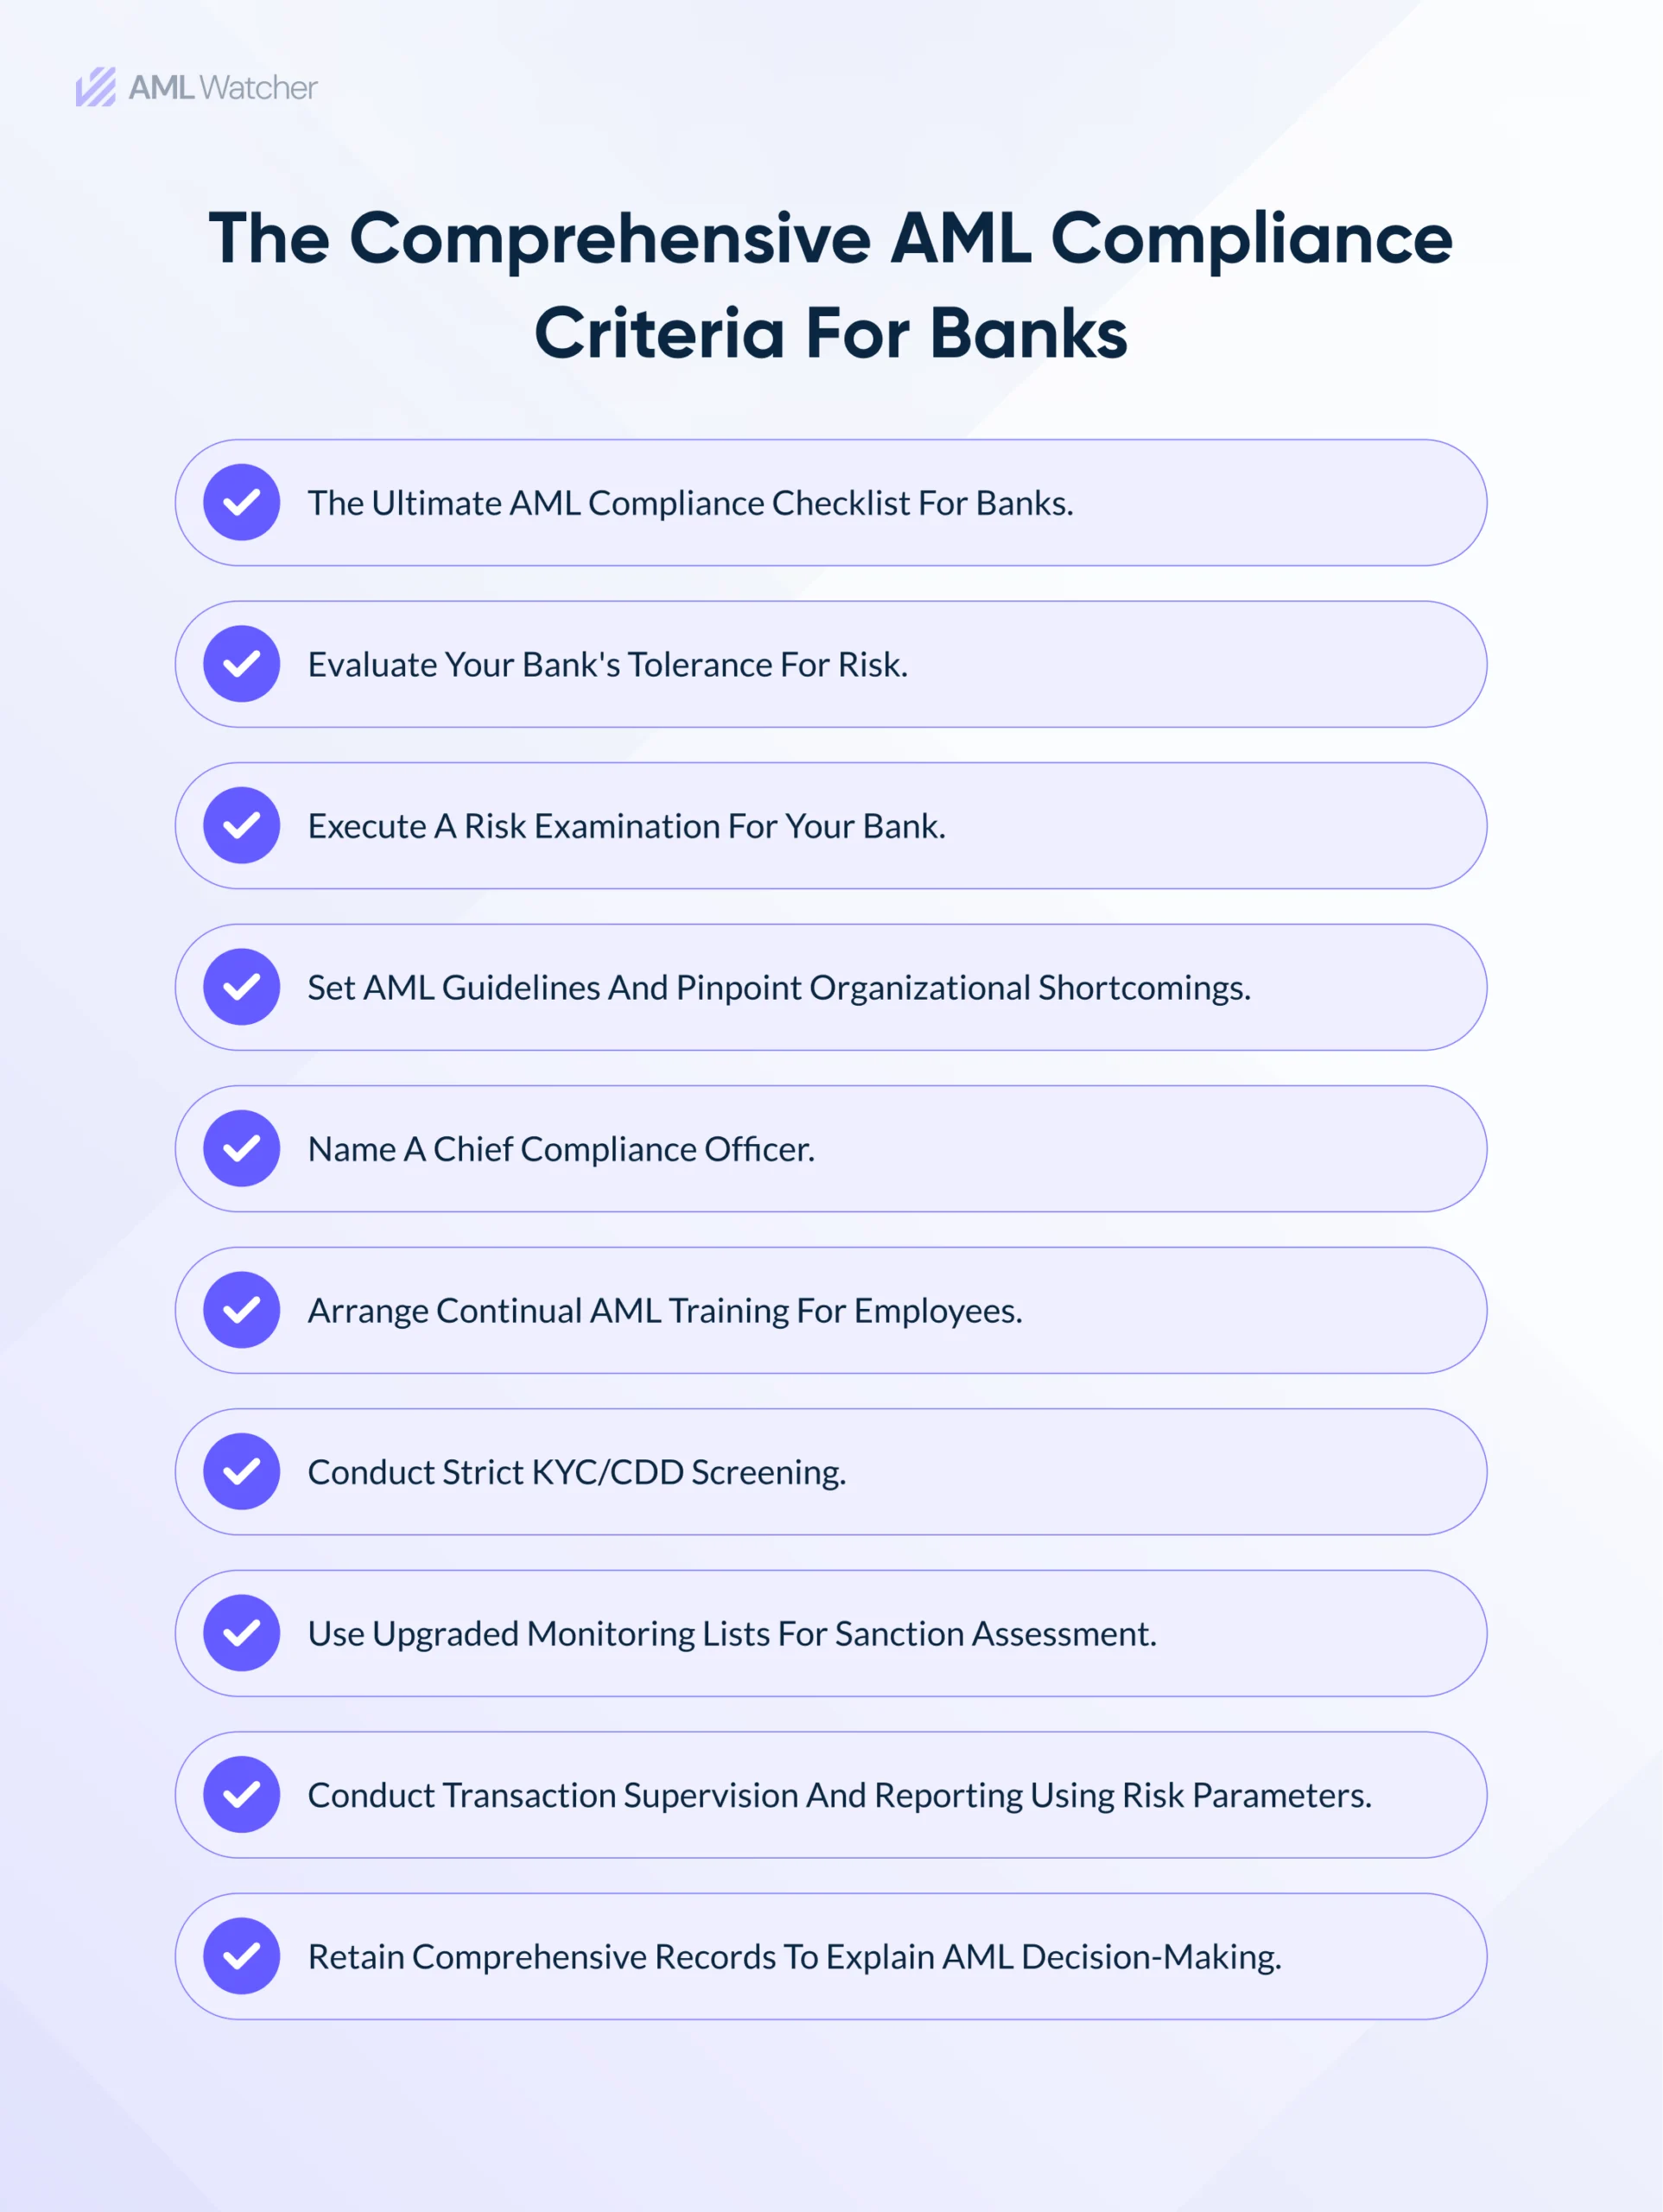 The comprehensive AML compliance criteria for banks 